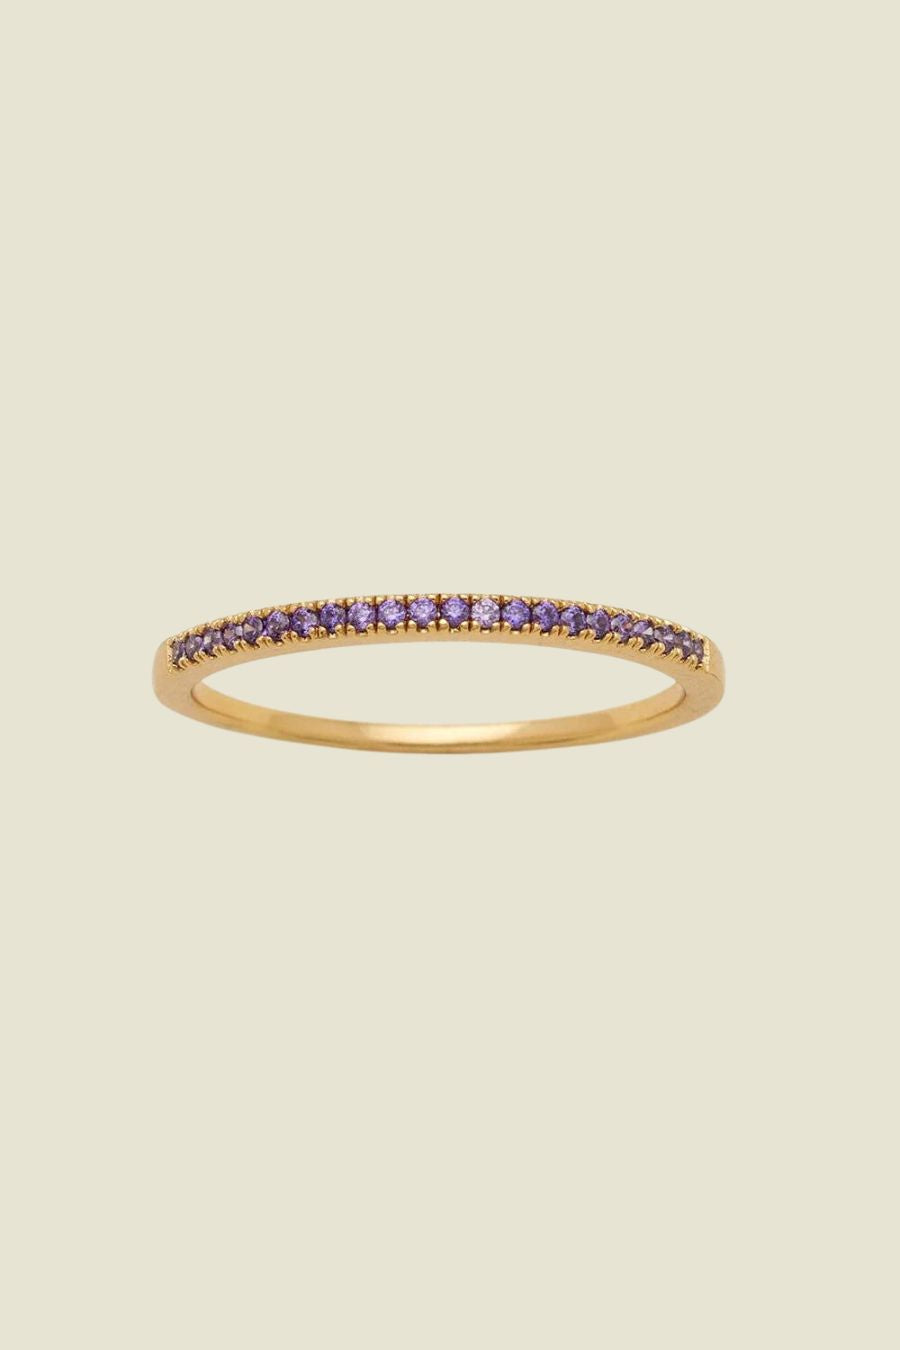 Made by Mary February Birthstone Stacking Ring